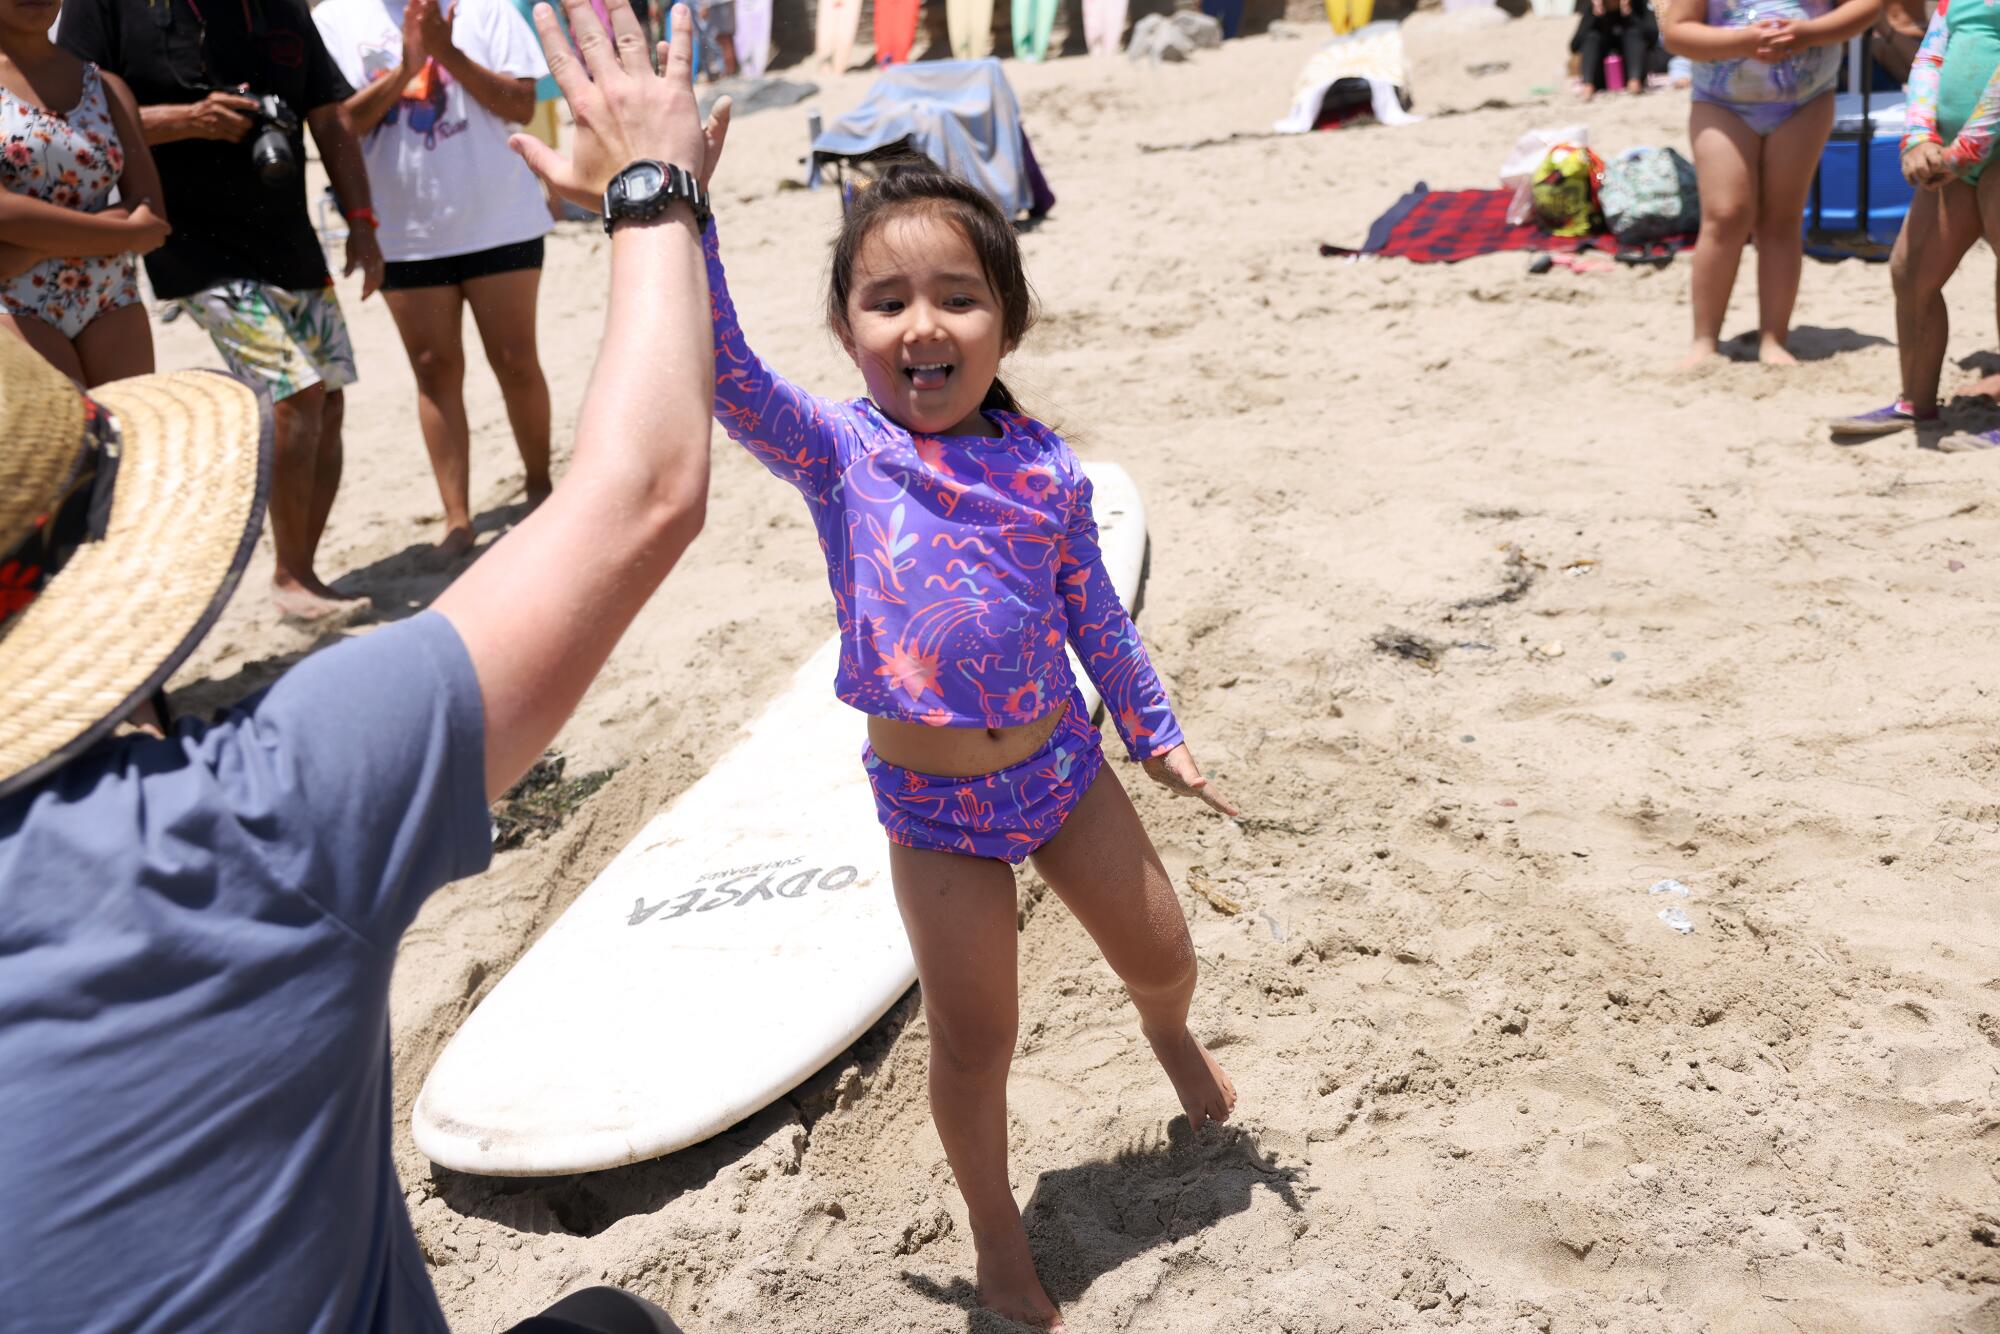 Umi Fabiola Kobayashi high-fives an instructor during a surf lesson at First Point.